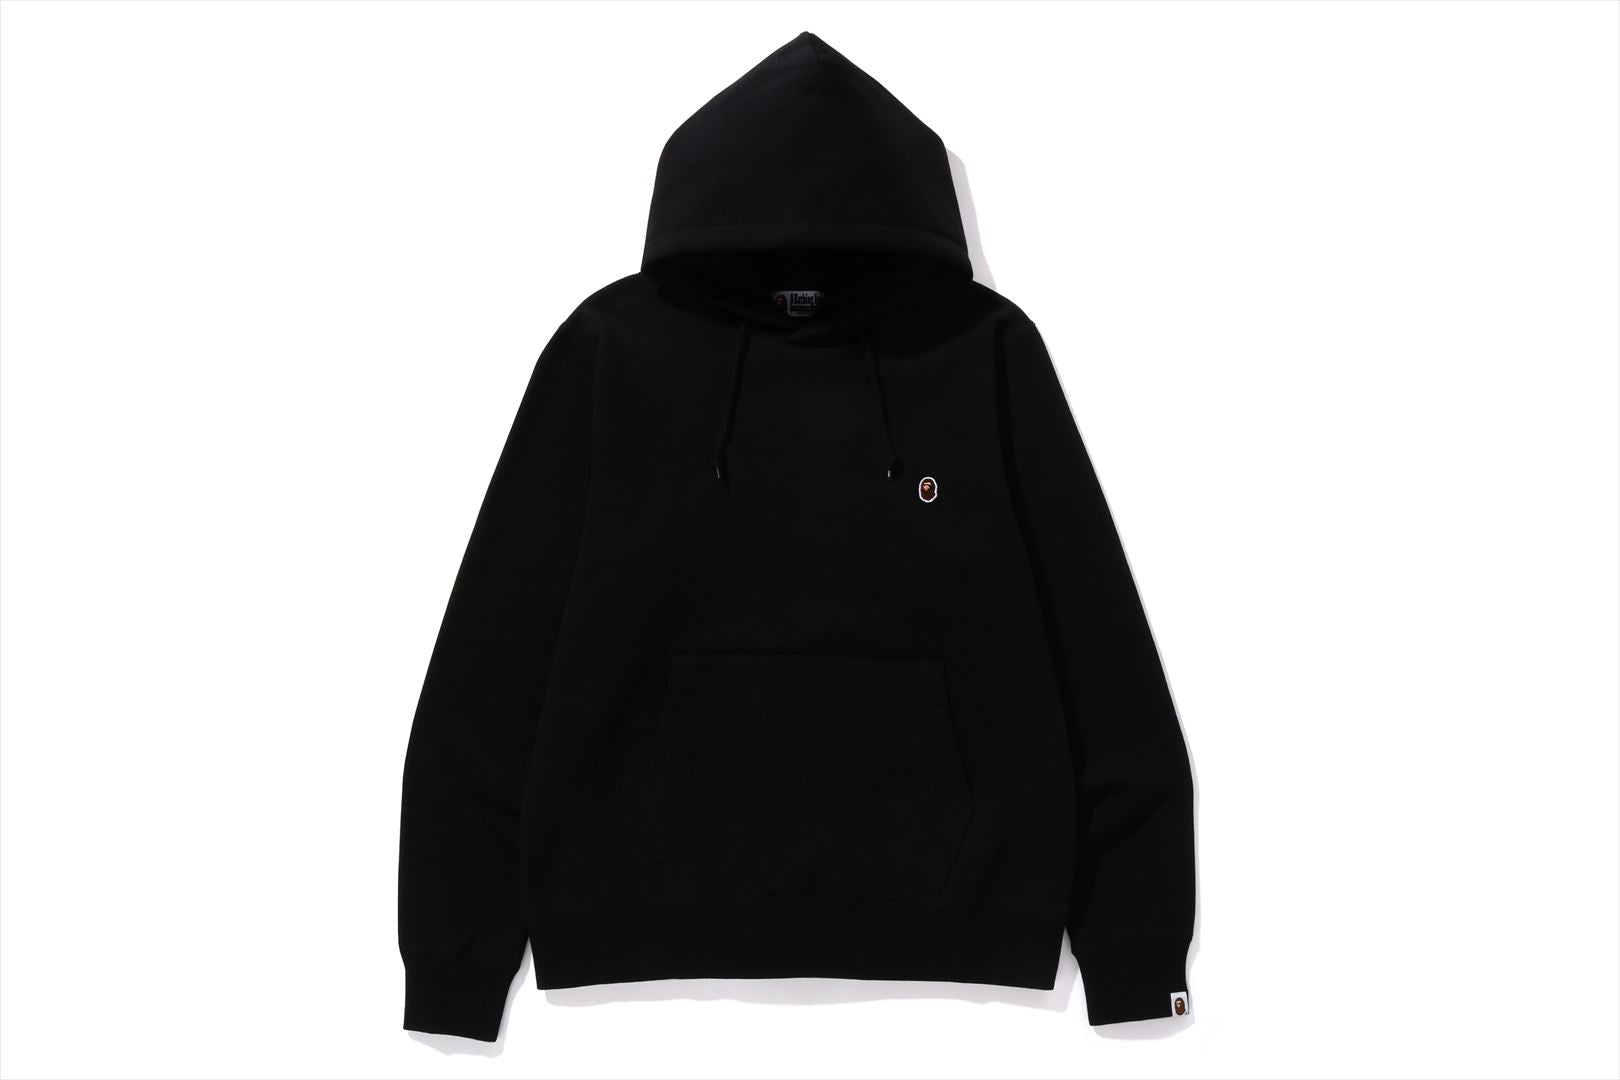 A CAMPING APE ONE POINT PULLOVER HOODIE | bape.com